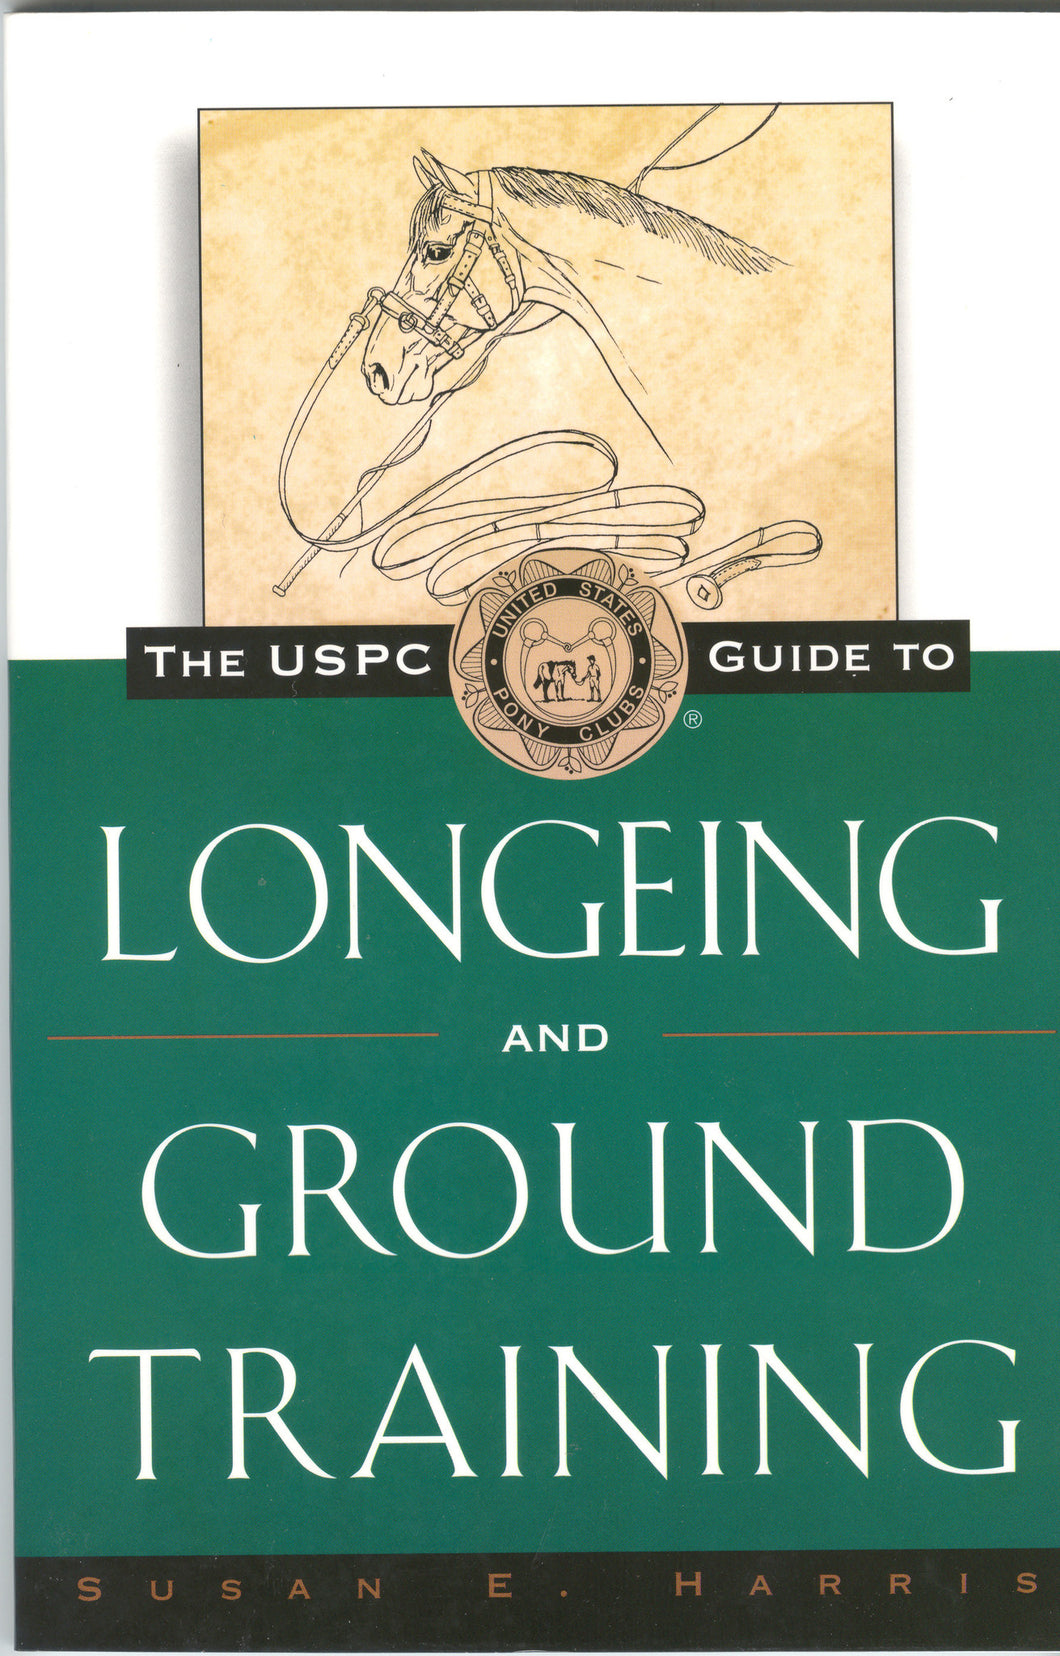 The USPC Guide to Longeing and Ground Training